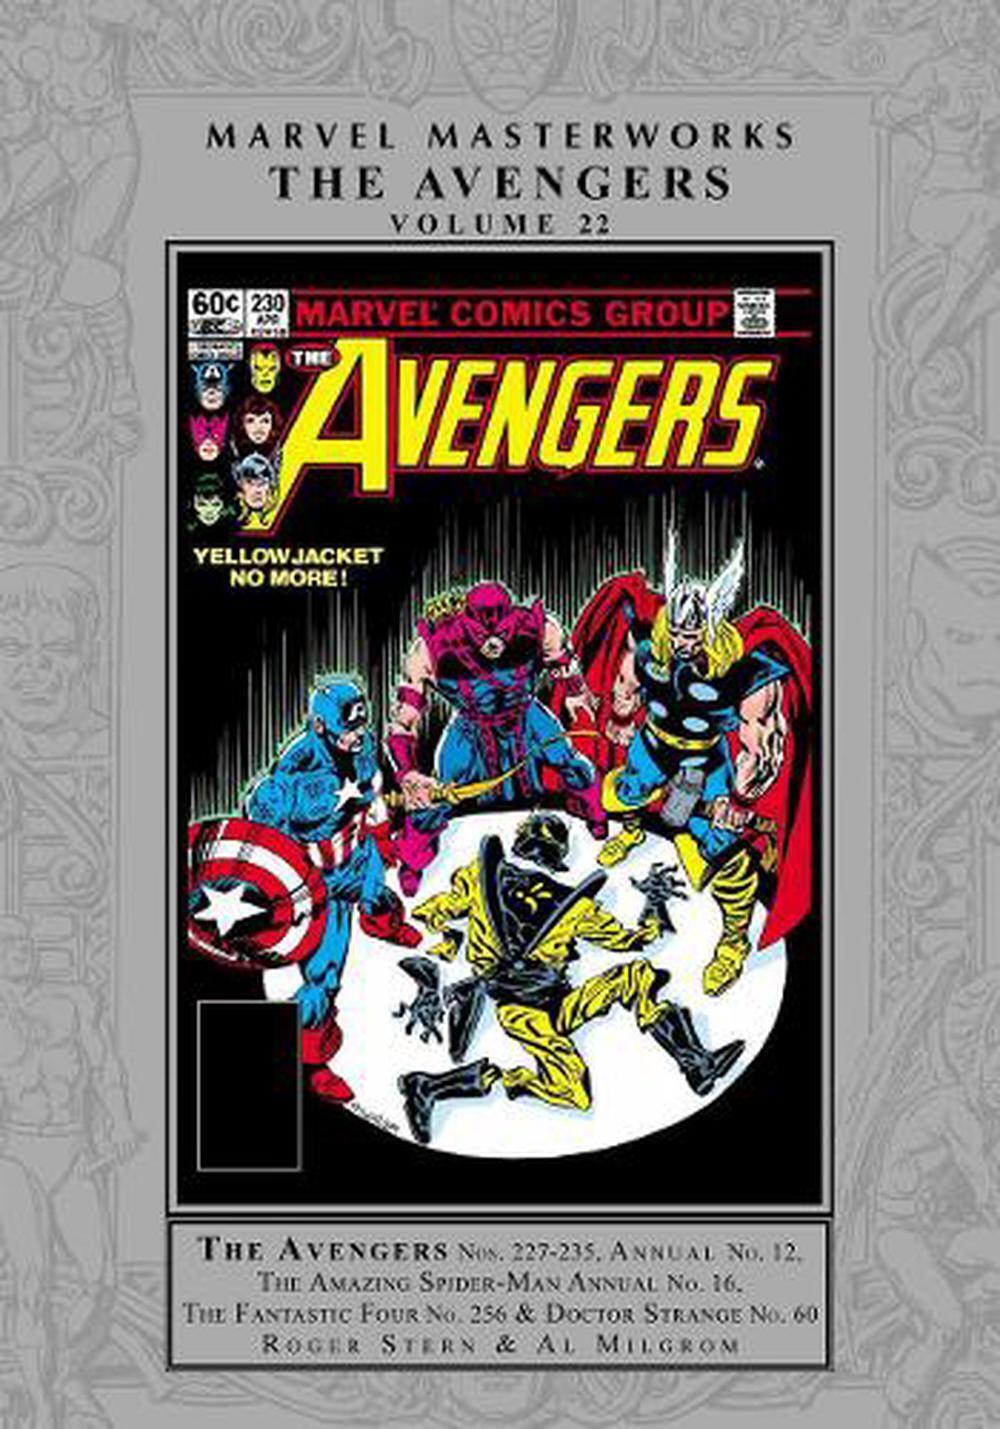 Marvel Masterworks: The Avengers Vol. 22 by Roger Stern (English) Hardcover Book